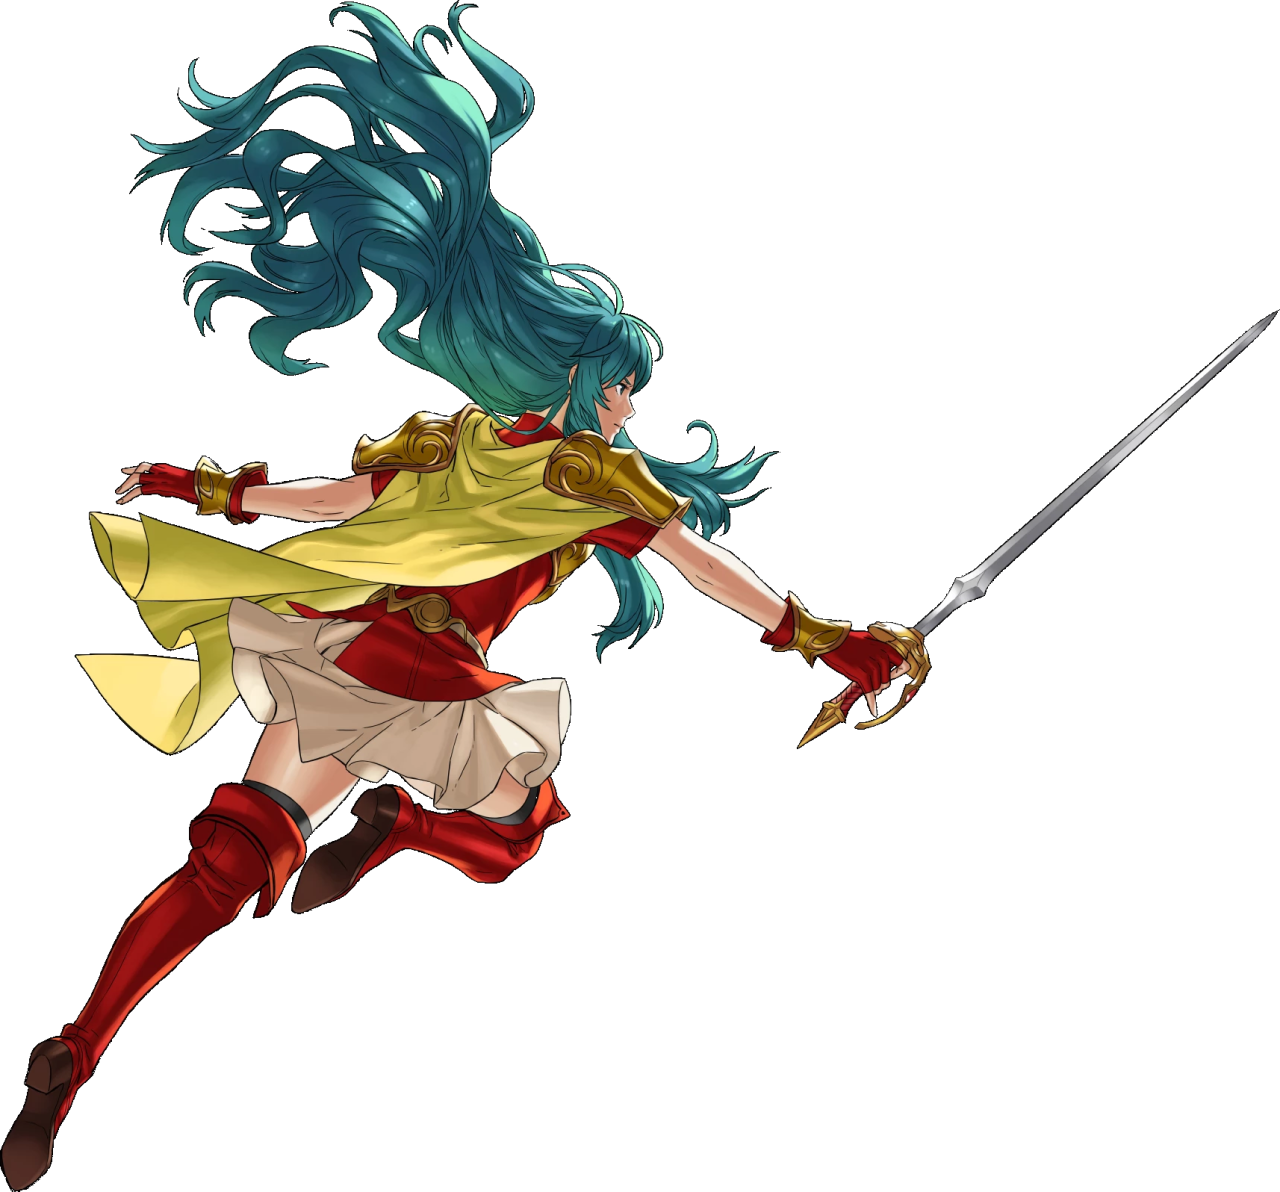 kazeshinobi:Transparent solo images of the character art from Fire Emblem Heroes;